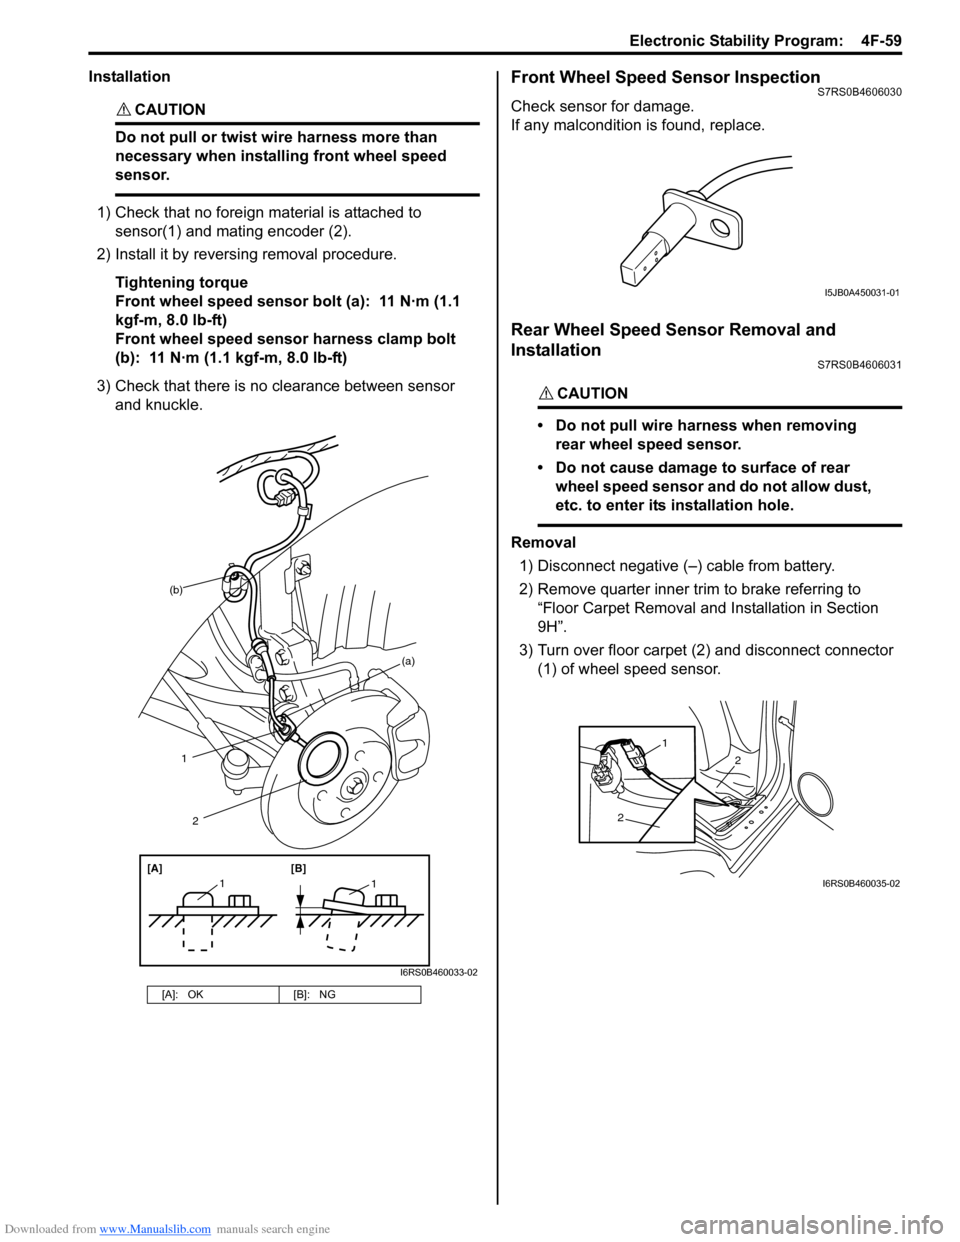 SUZUKI SWIFT 2005 2.G Service Owners Guide Downloaded from www.Manualslib.com manuals search engine Electronic Stability Program:  4F-59
Installation
CAUTION! 
Do not pull or twist wire harness more than 
necessary when installing front wheel 